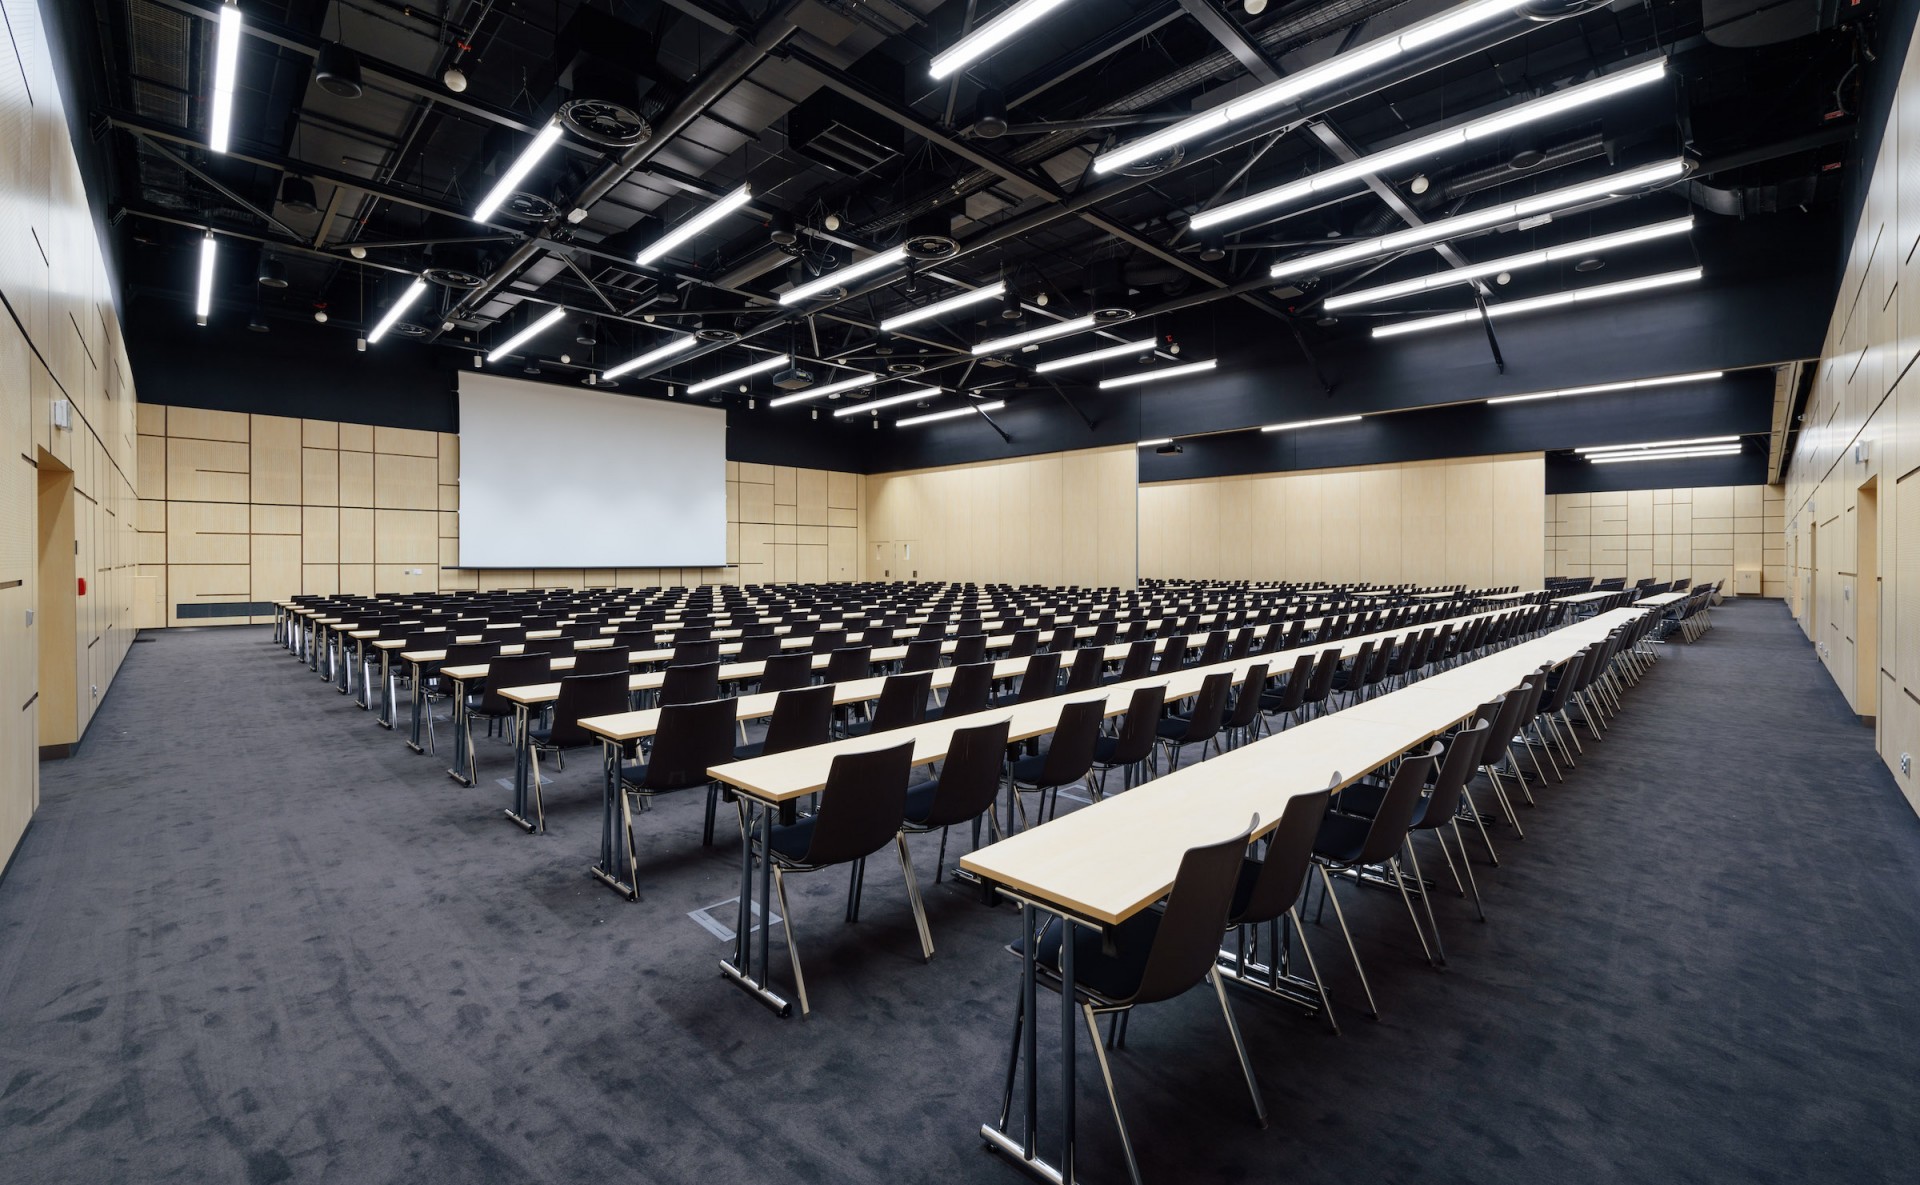 Large conference hall